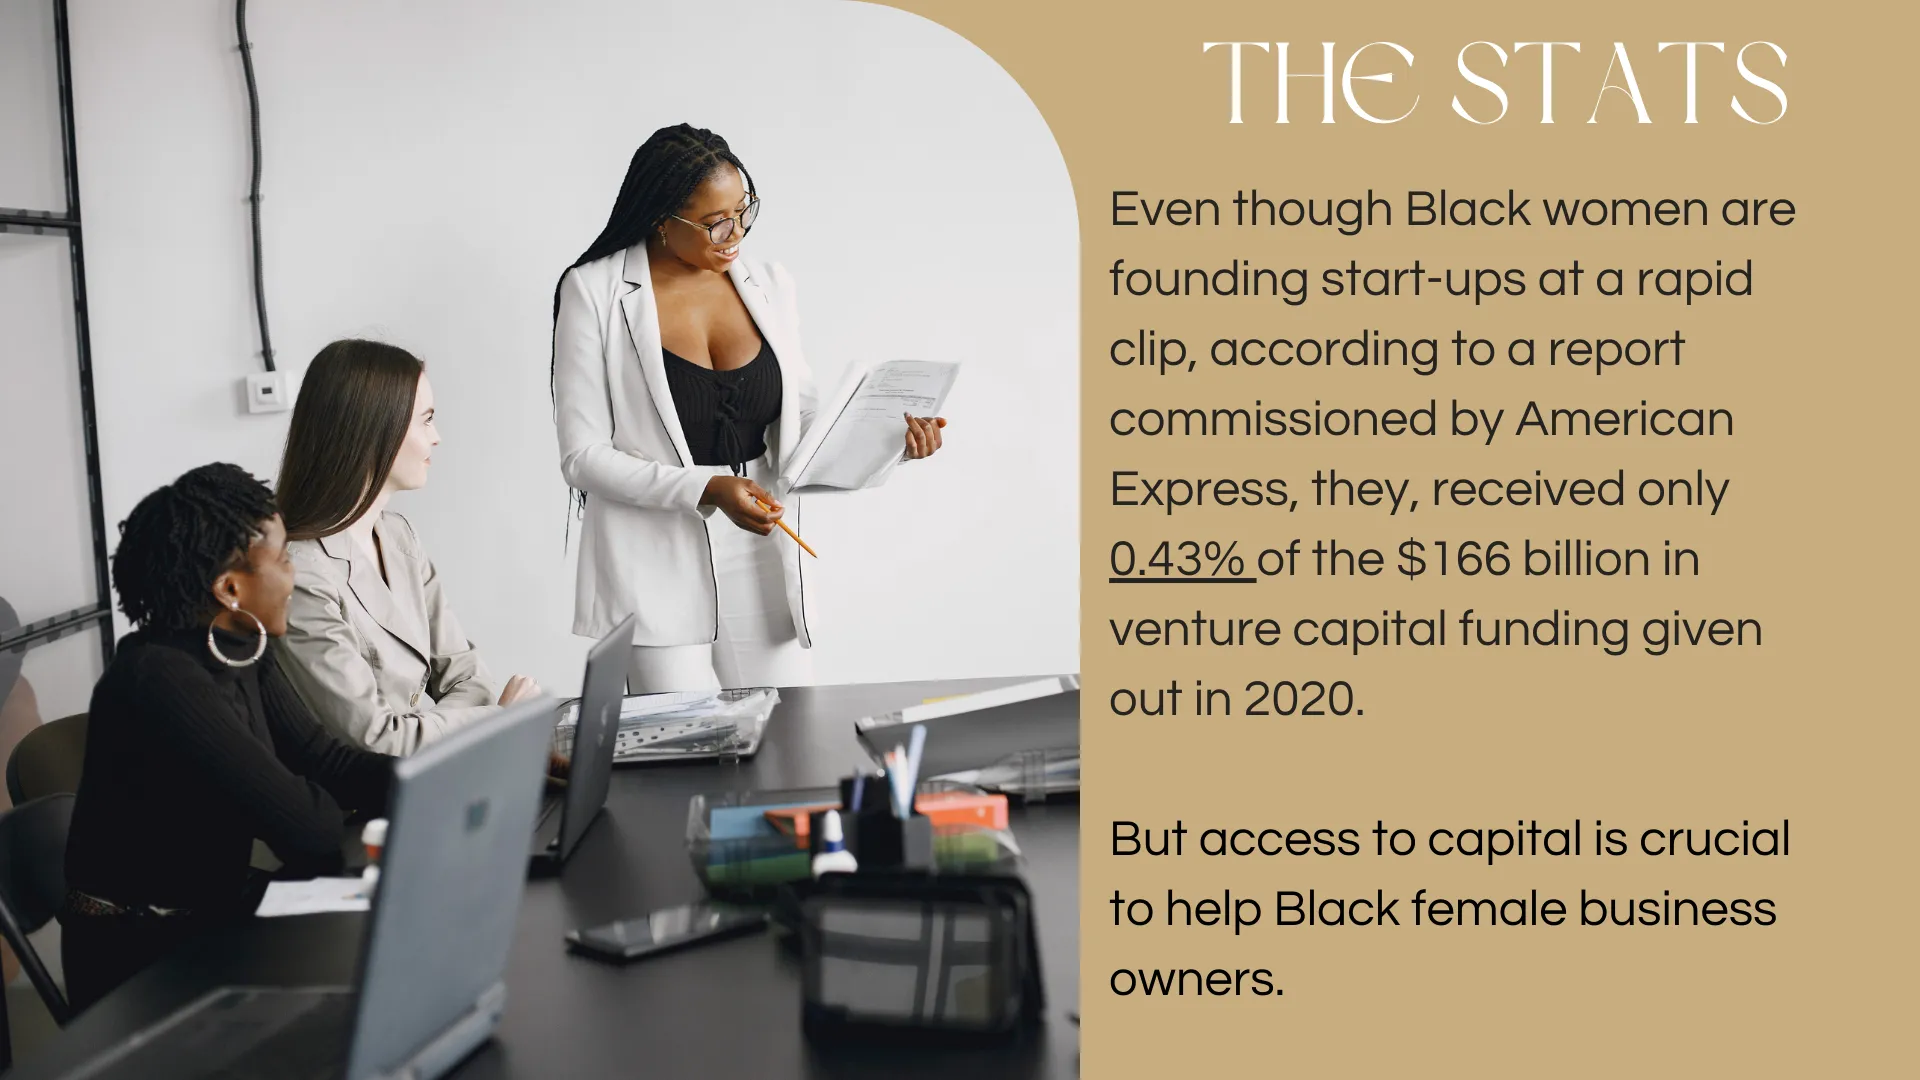 Even though Black women are founding start-ups at a rapid clip, according to a report commissioned by American Express, they, received only 0.43% of the $166 billion in venture capital funding given out in 2020.   But access to capital is crucial to help Black female business owners. 